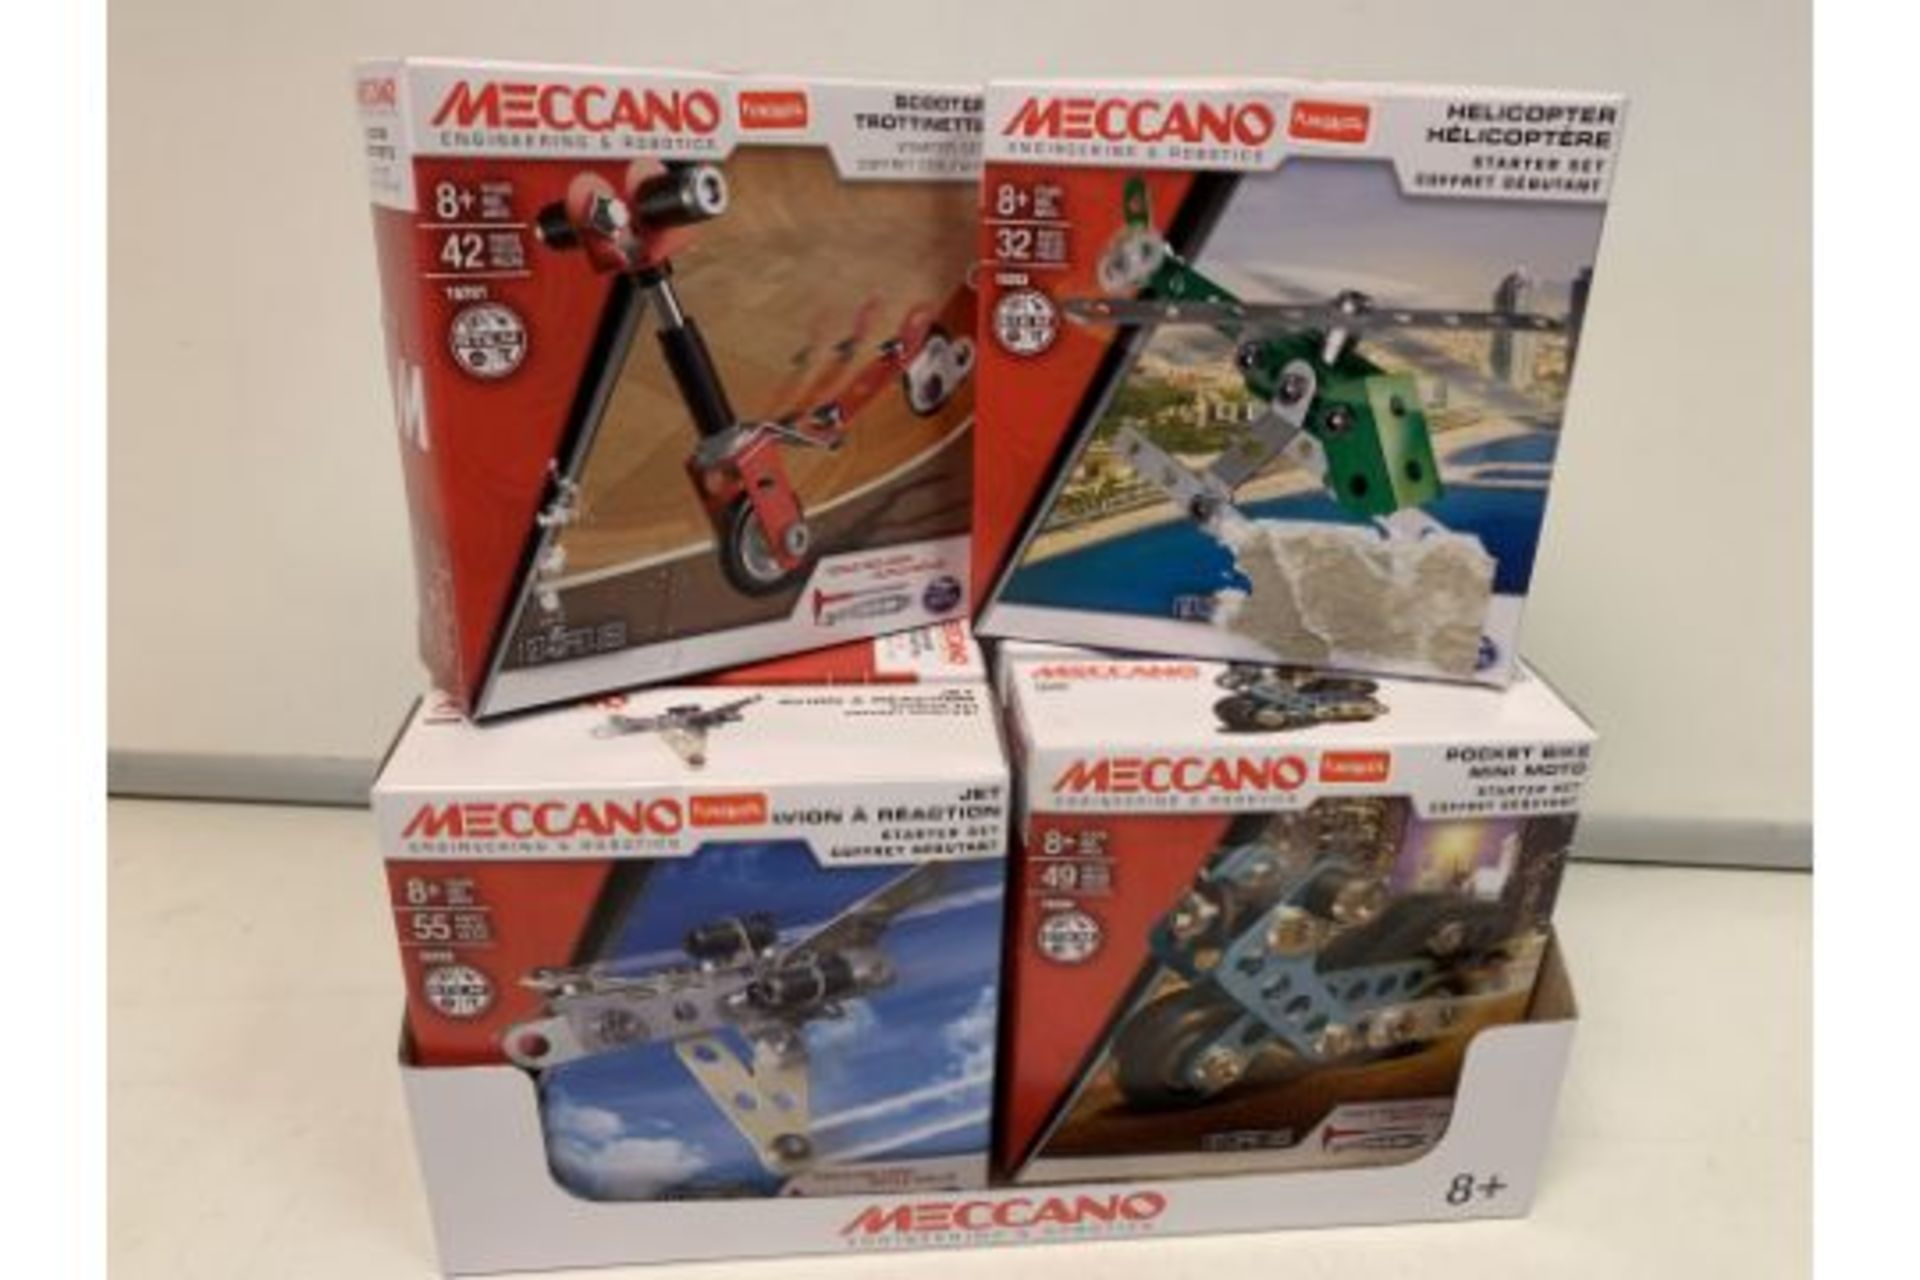 18 X MECCANO KITS IN ASSORTED DESIGNS TO INCLUDE SCOOTER, JET, POCKET BIKE, HELICOPTER ETC